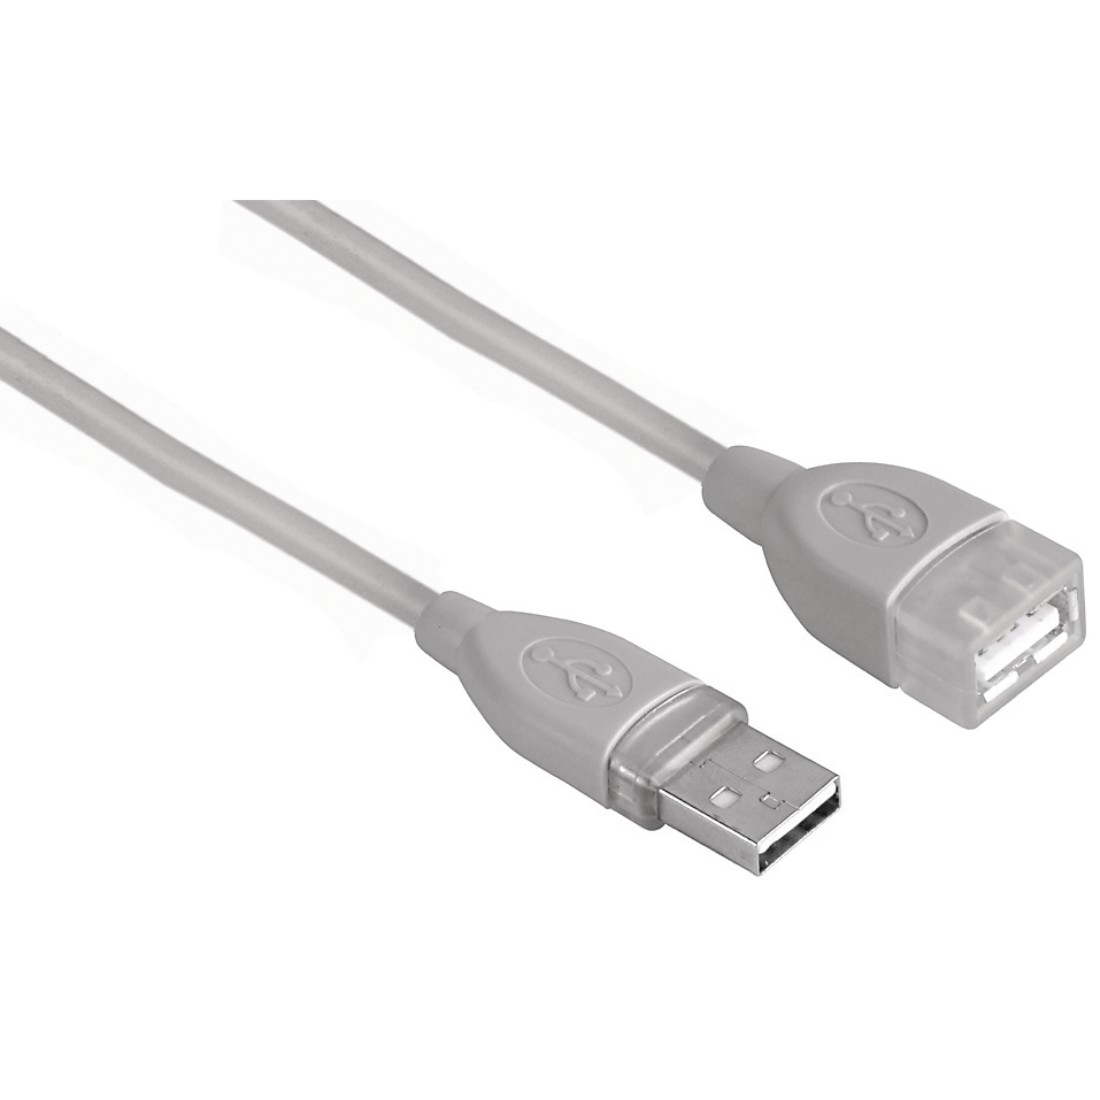 Hama USB 2.0 Extension Cable, Shielded, grey